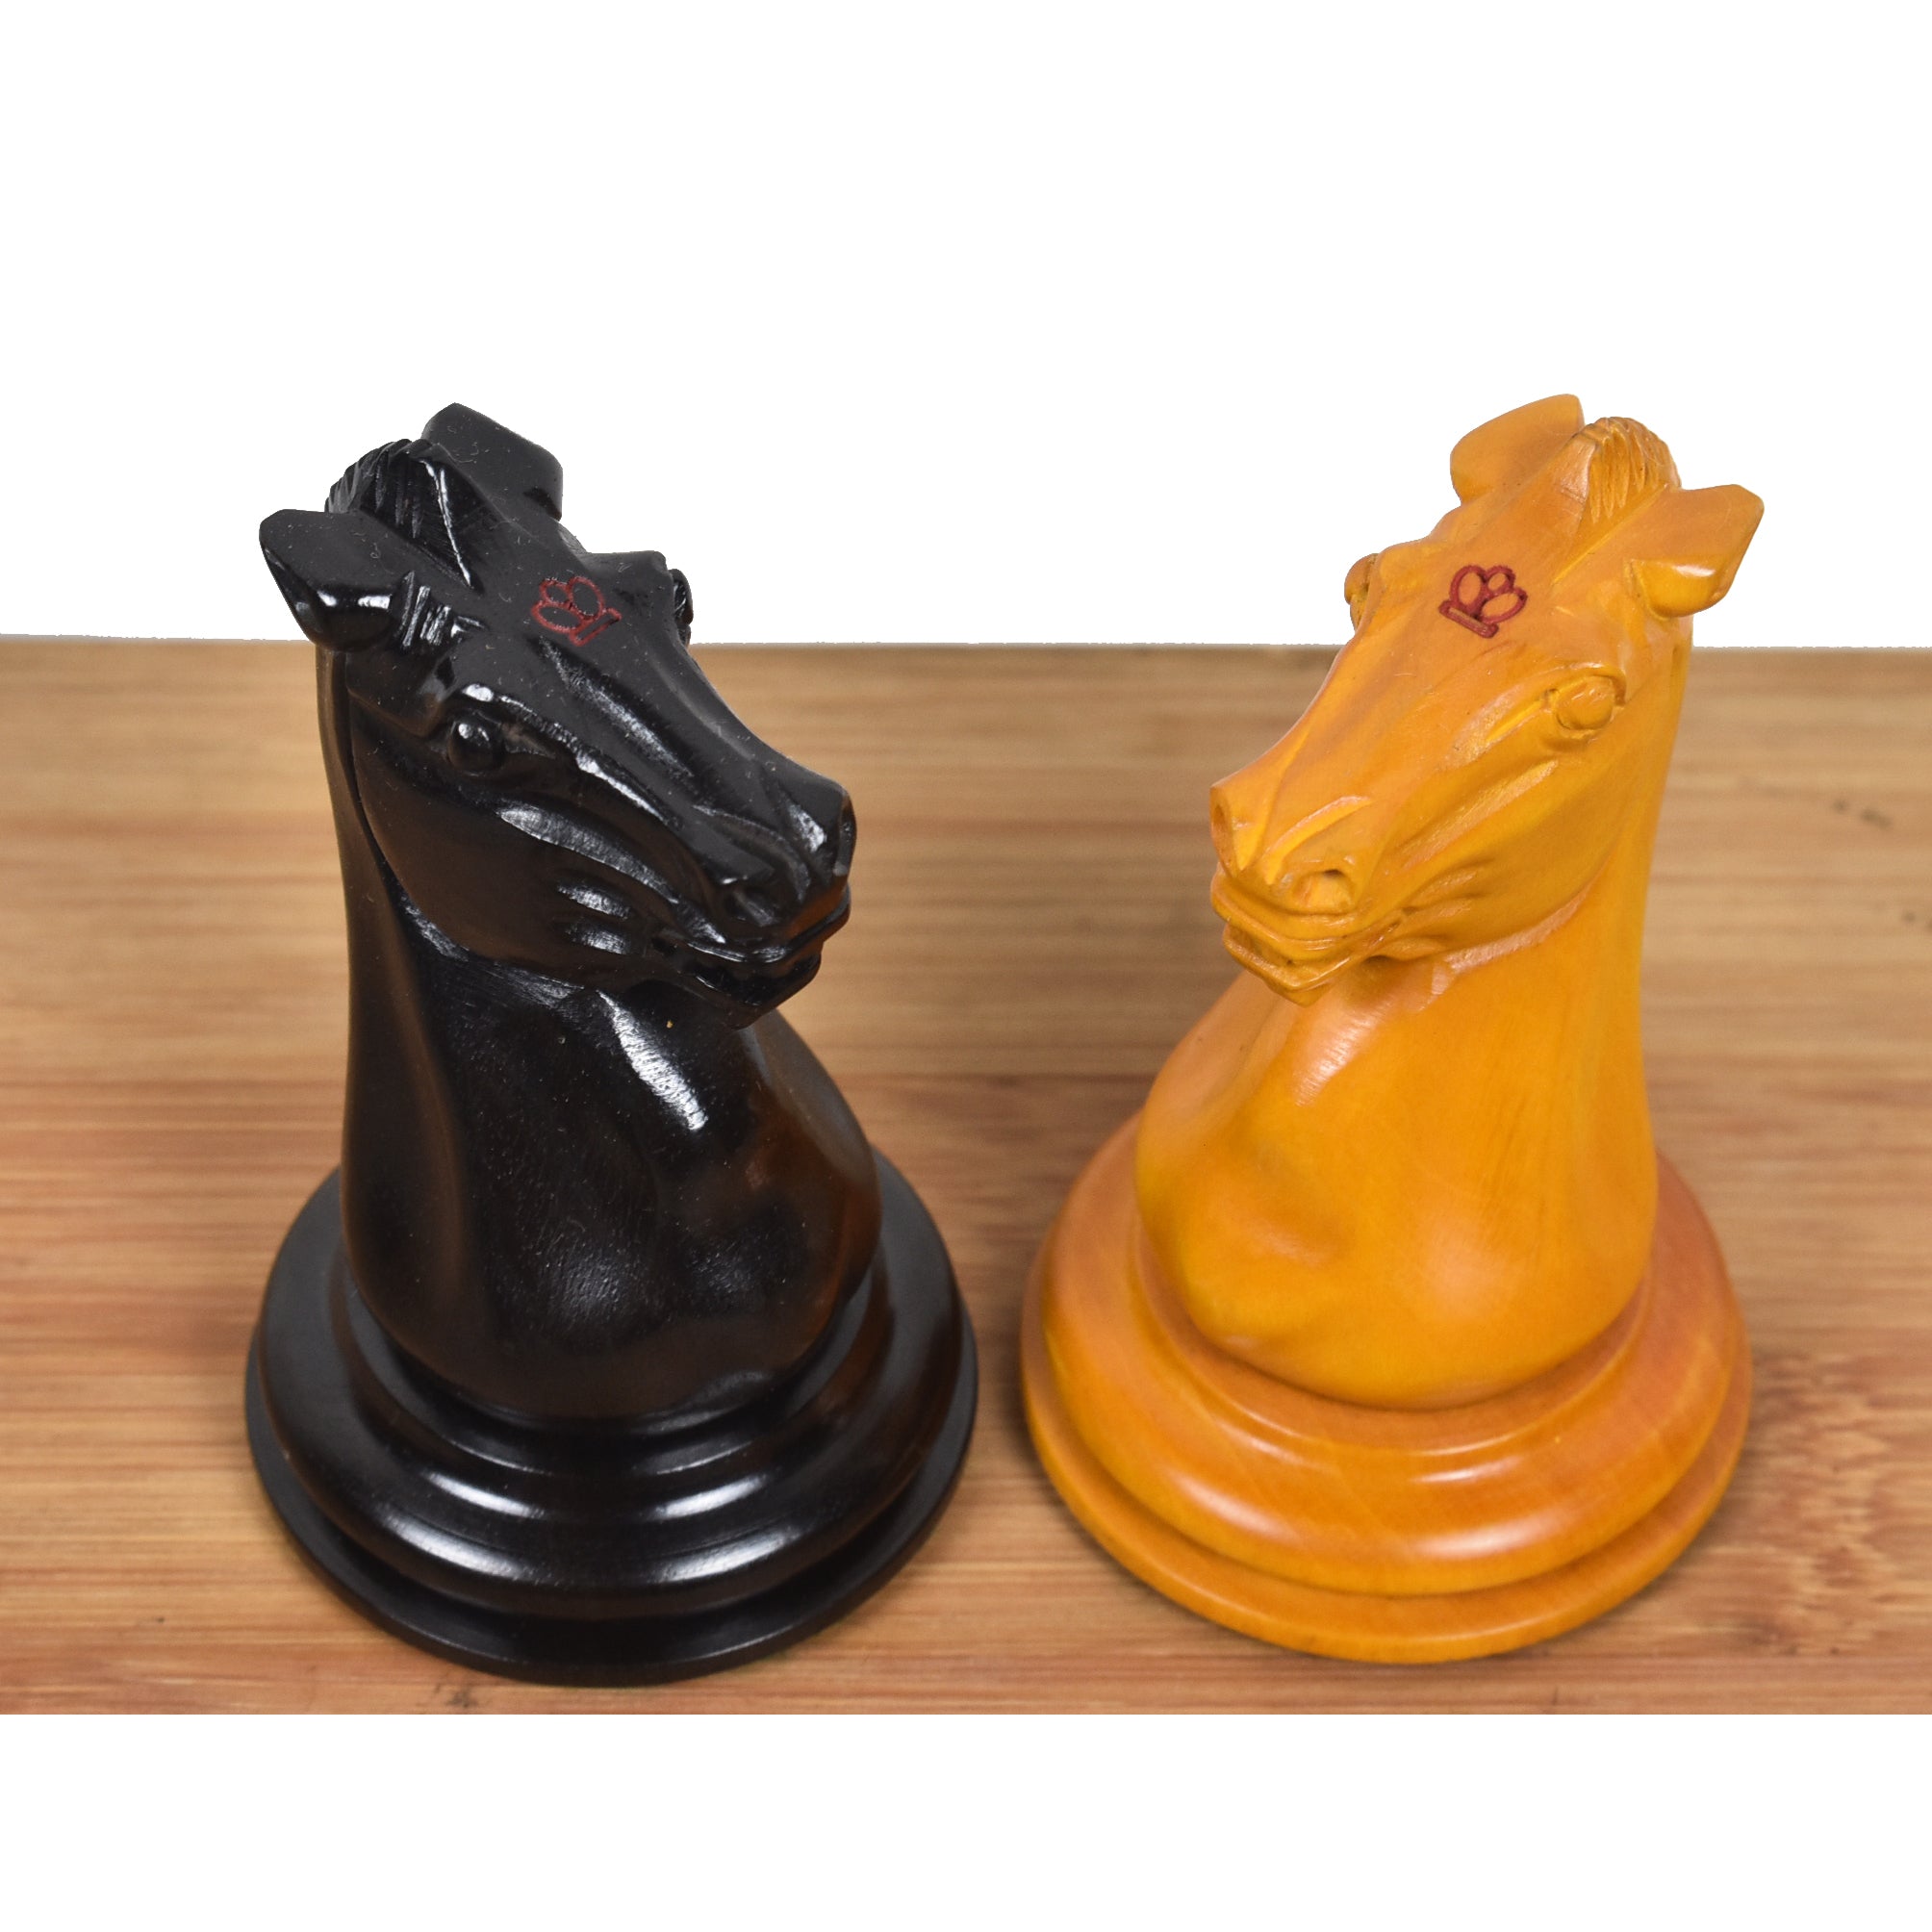 Slightly Imperfect 1849-50 Leuchars Cook Staunton Chess Pieces Only set - Ebony Wood & Antiqued Boxwood - 4.5"